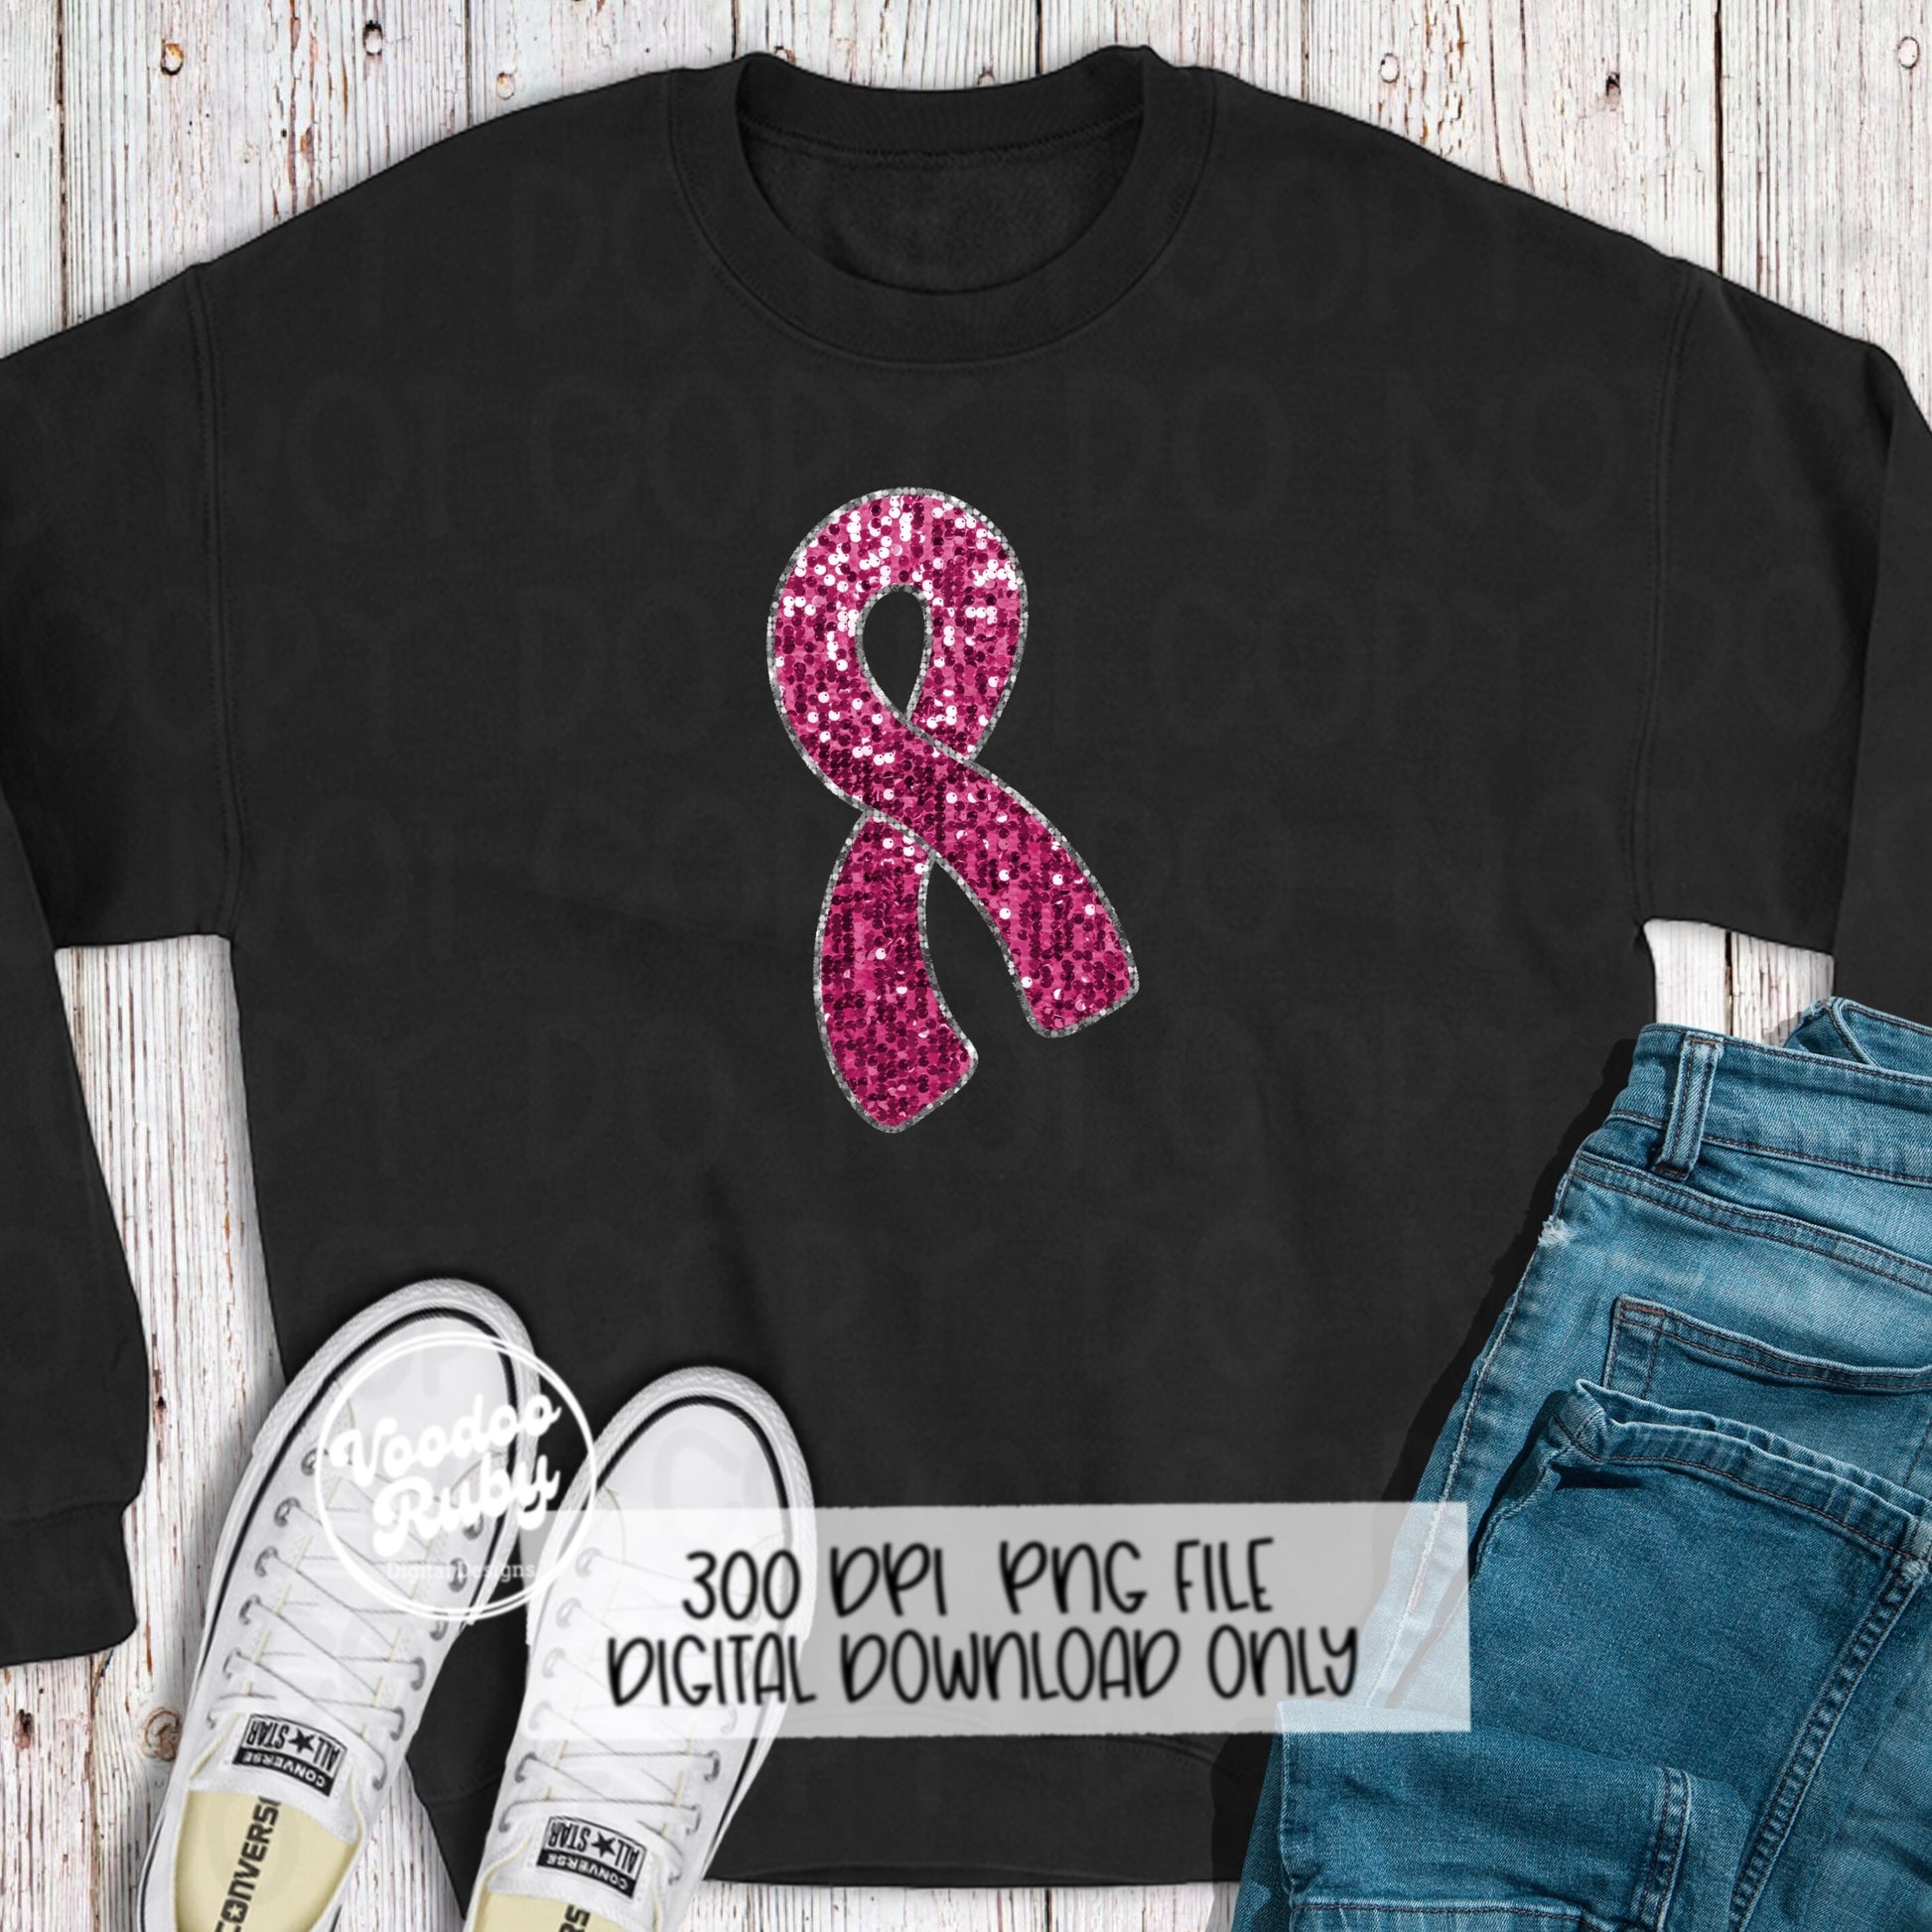 Faux sequin pink ribbon png design in high resolution perfect for physical end products.